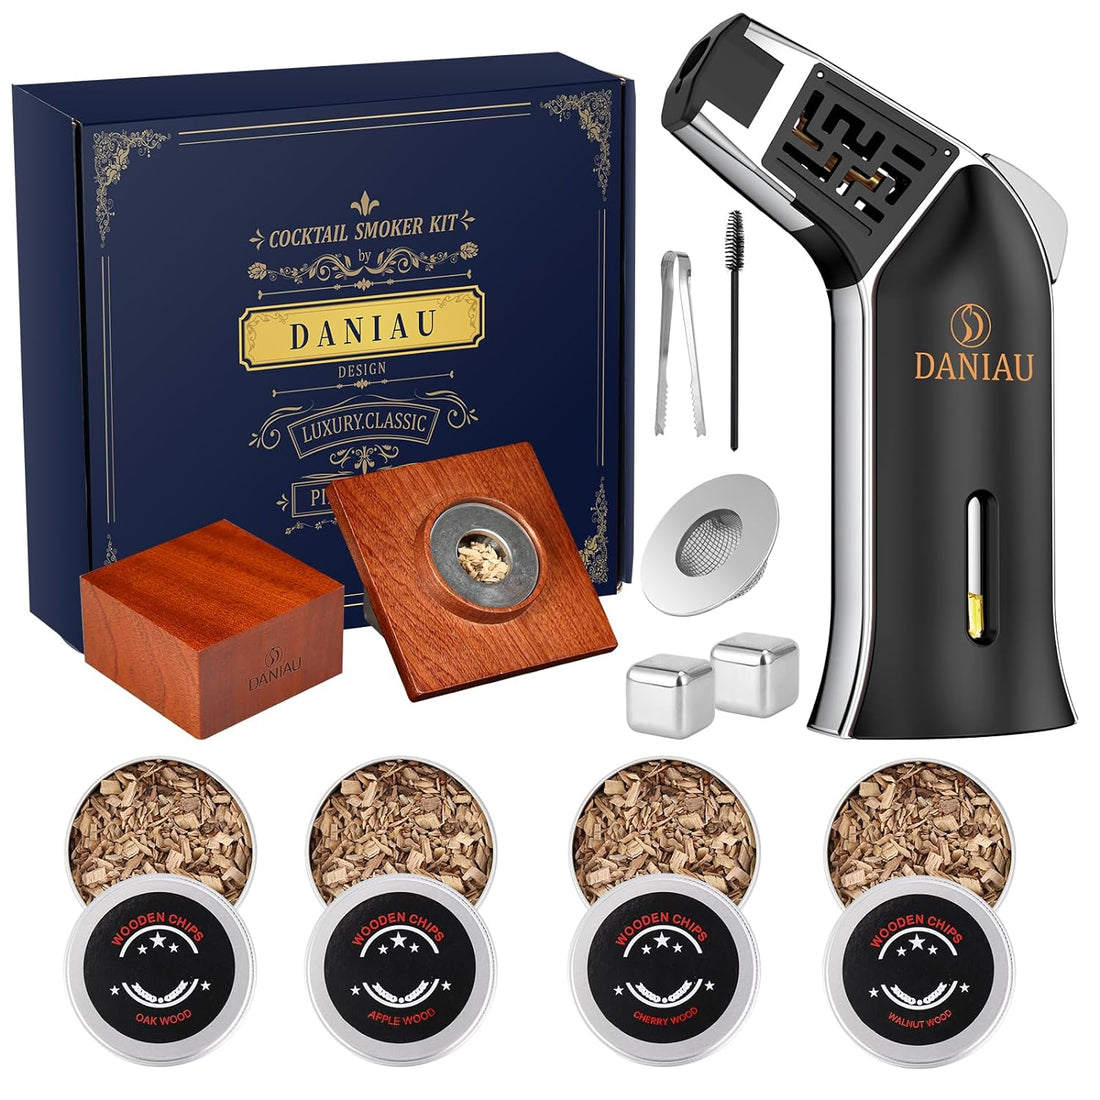 DANIAU Cocktail Smoker Kit with Torch,4 Flavors Wood Chips for Whiskey Smoker Kit,Old Fashioned Cocktail Kit Bourbon Drink Smoker Infuser Kit with Reusable Ice Cubes, Gifts for Men, Dad(square, black)